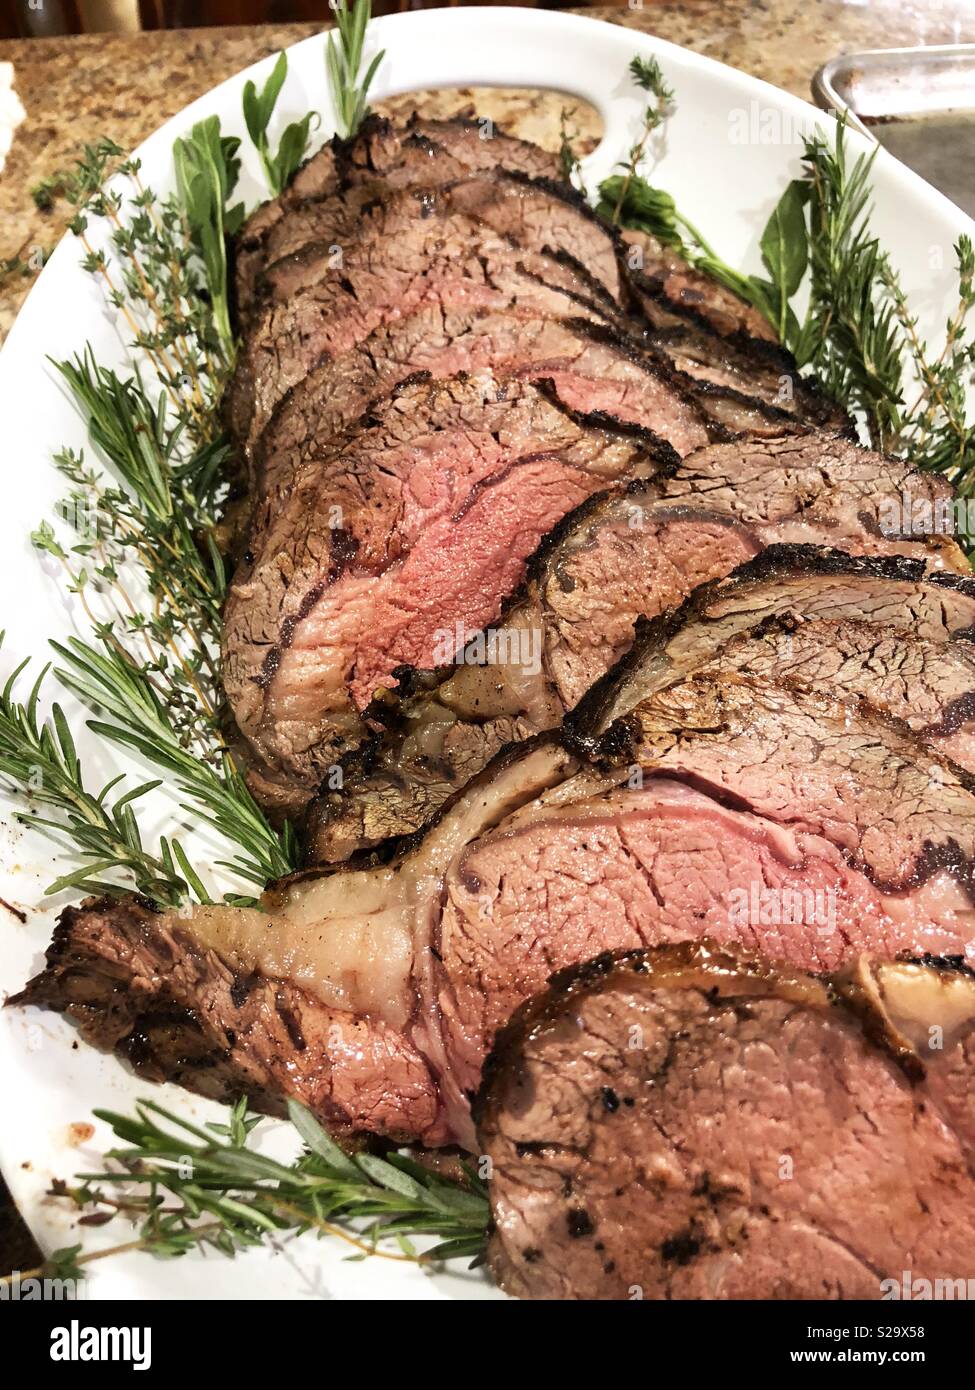 Beautiful slices of prime rib meat on a white platter garnished with rosemary. Stock Photo